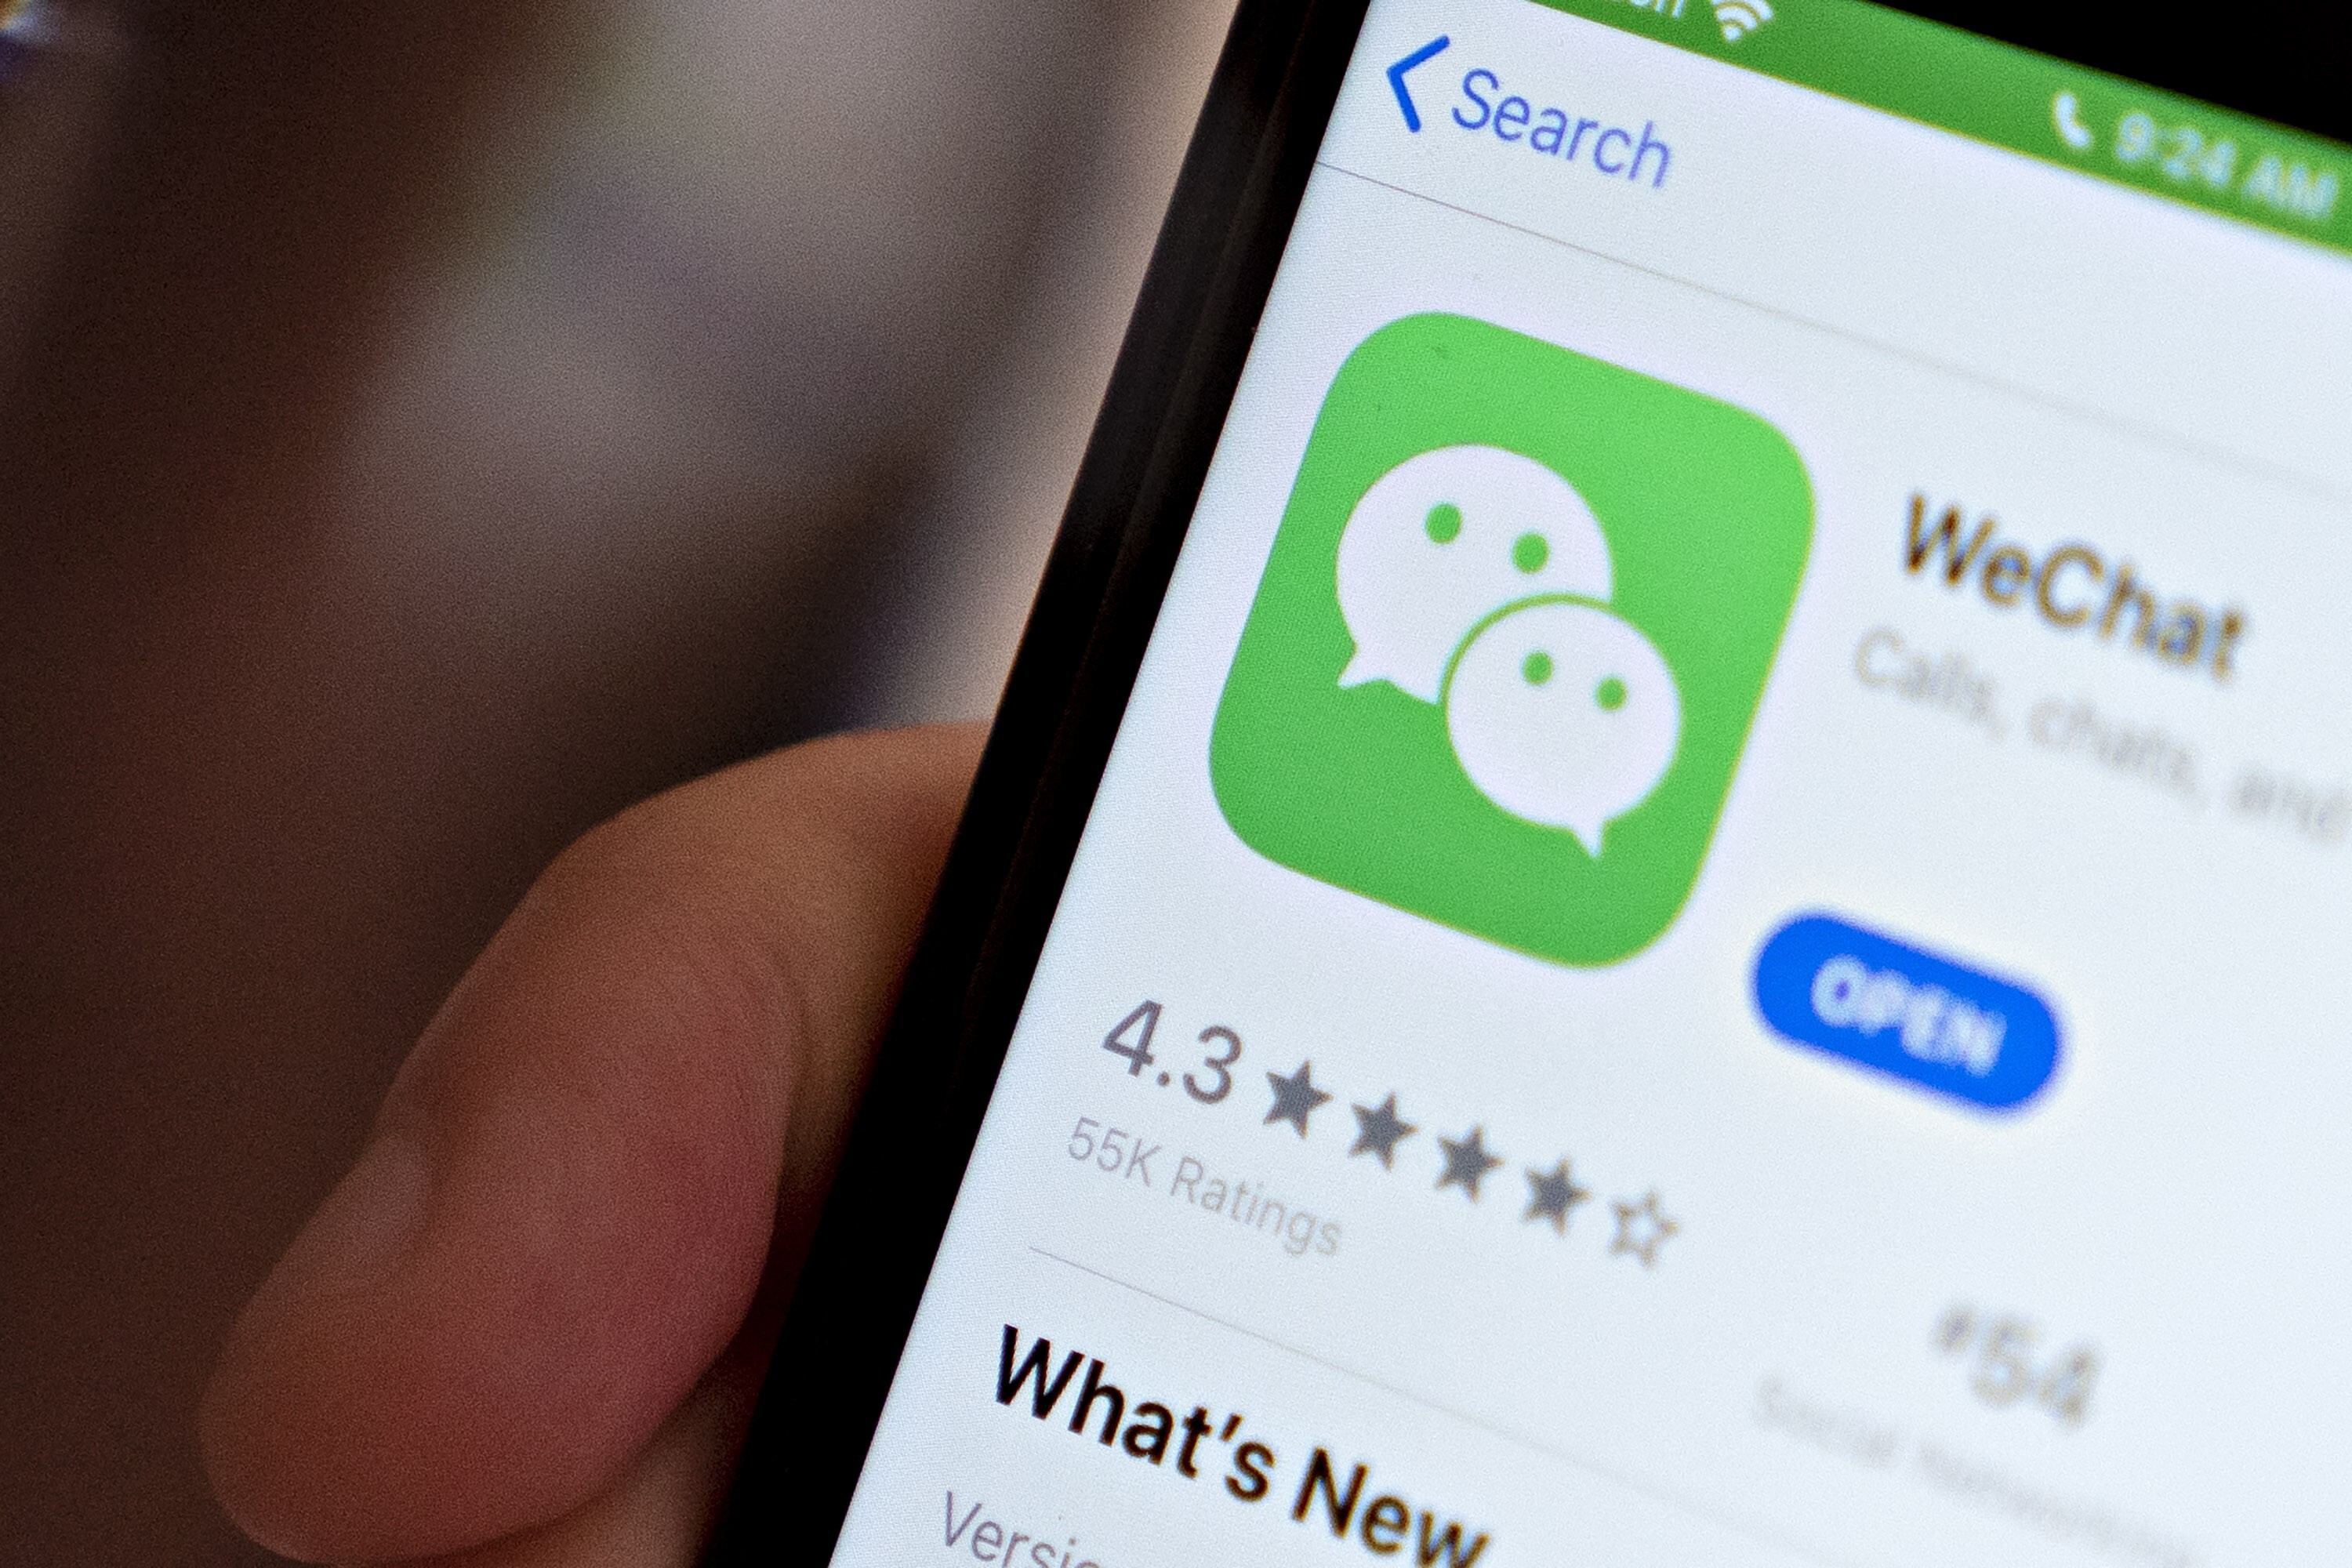 Tencent shares jumped after it was reported that US companies will be allowed to still use WeChat in China. Photo: Bloomberg